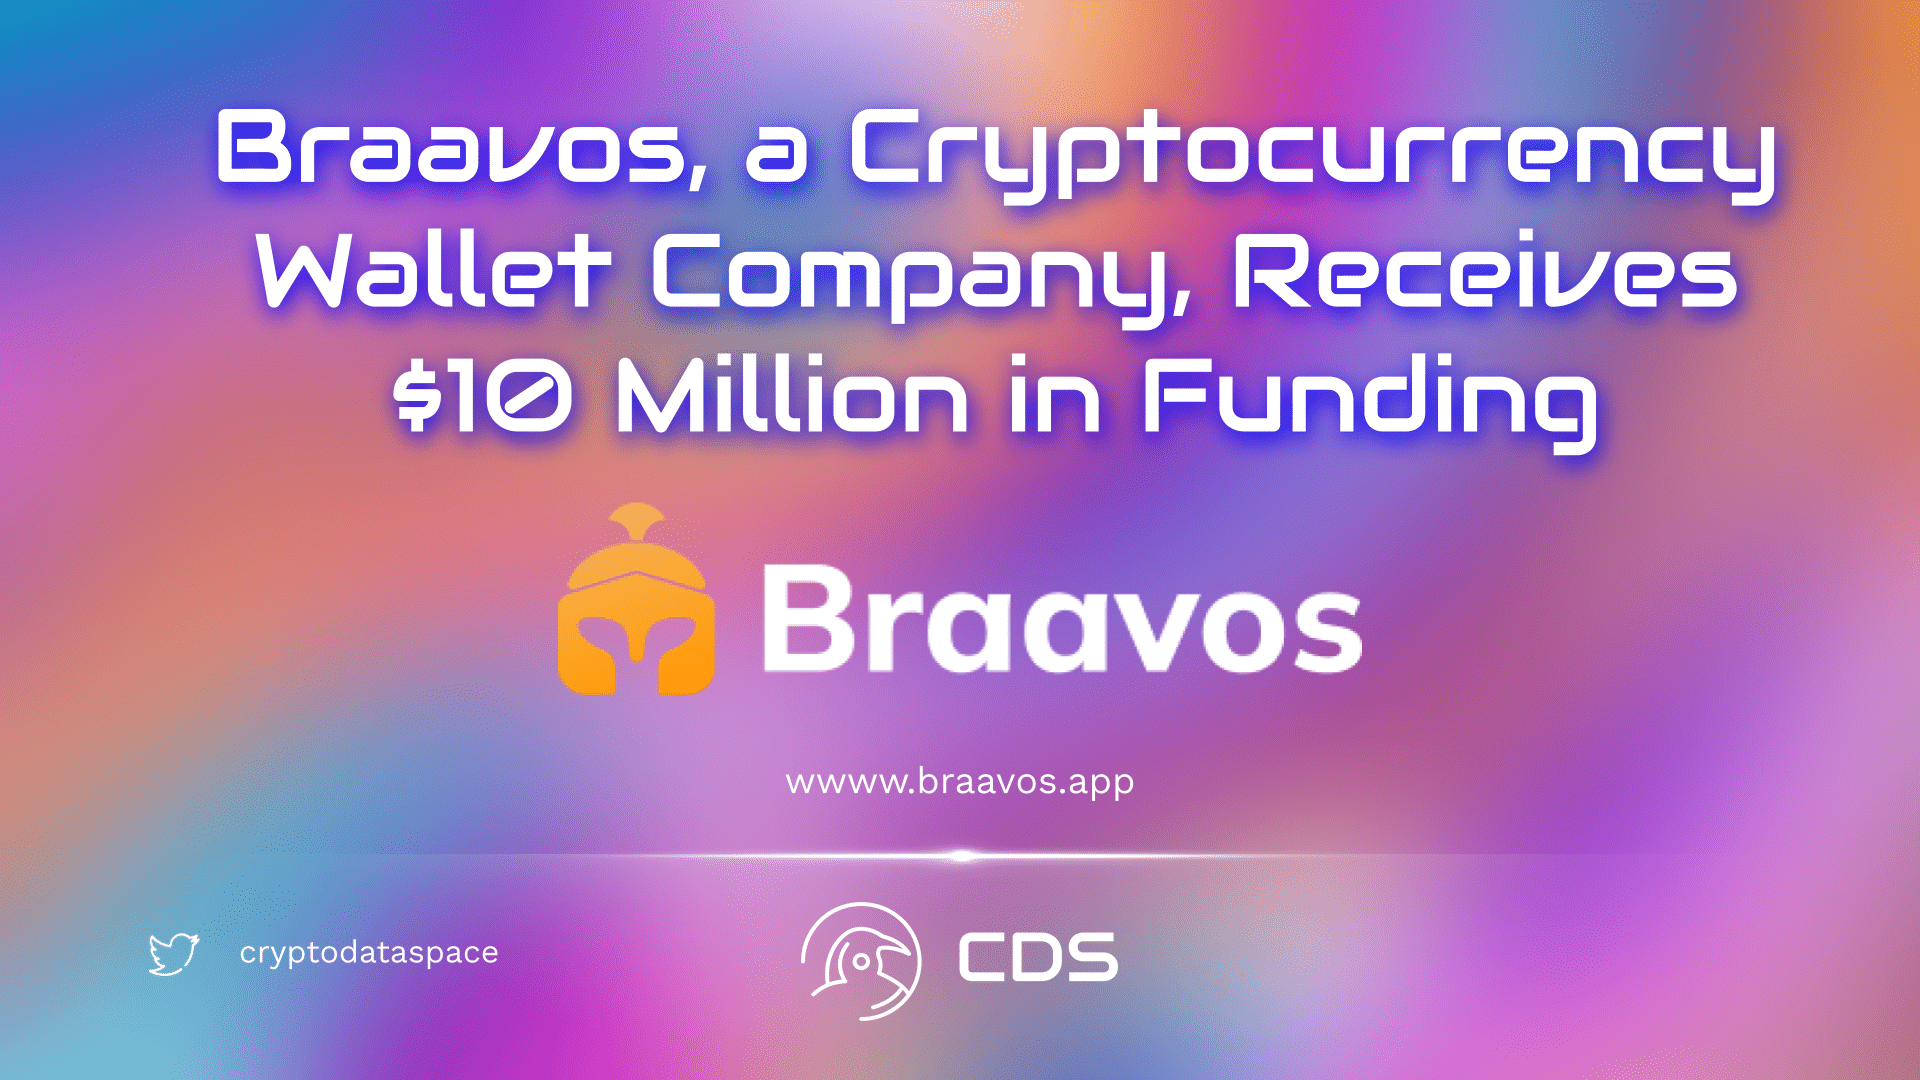 Braavos, a Cryptocurrency Wallet Company, Receives $10 Million in Funding